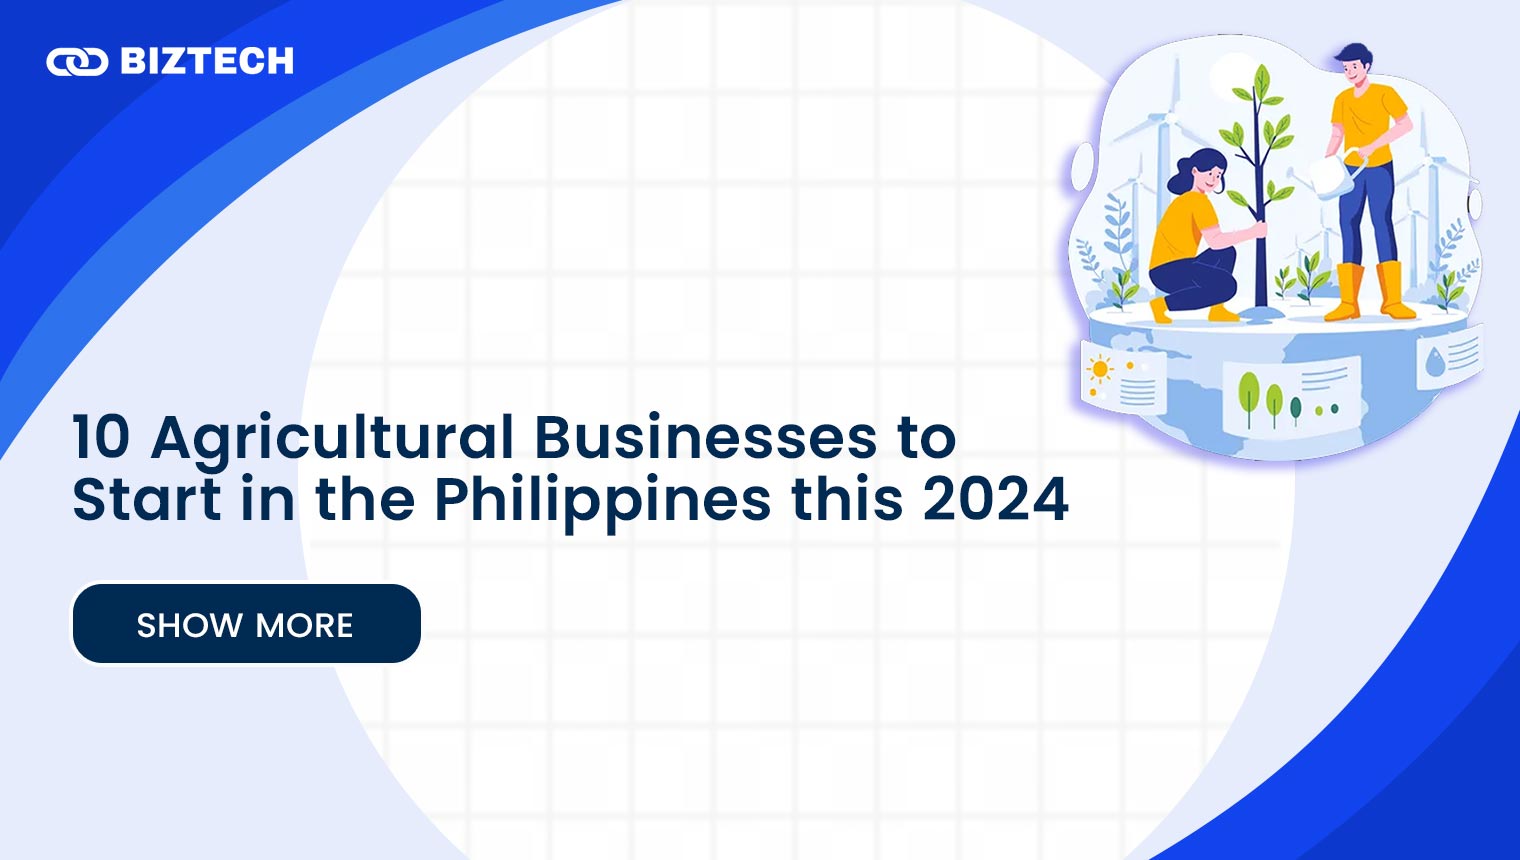 Top 10 Agricultural Businesses to Start in the Philippines (2024)